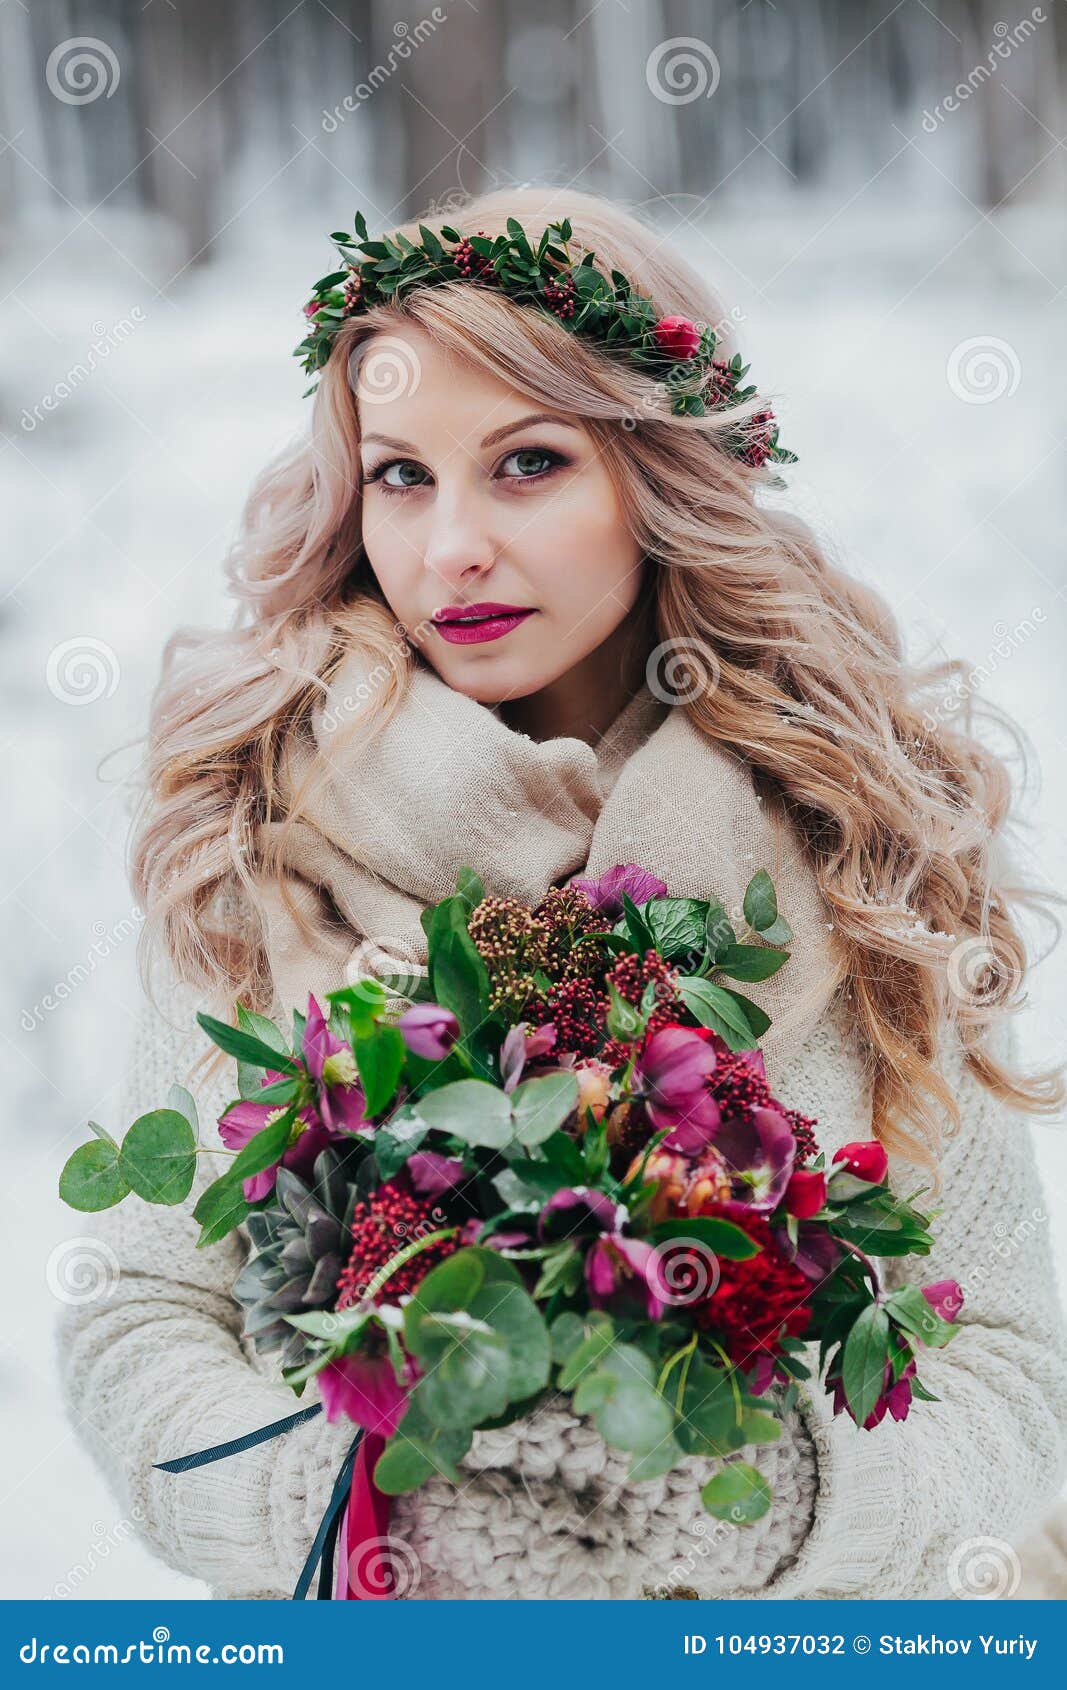 https://thumbs.dreamstime.com/z/young-girl-slavic-appearance-wreath-wildflowers-beautiful-bride-holds-bouquet-winter-background-young-girl-104937032.jpg